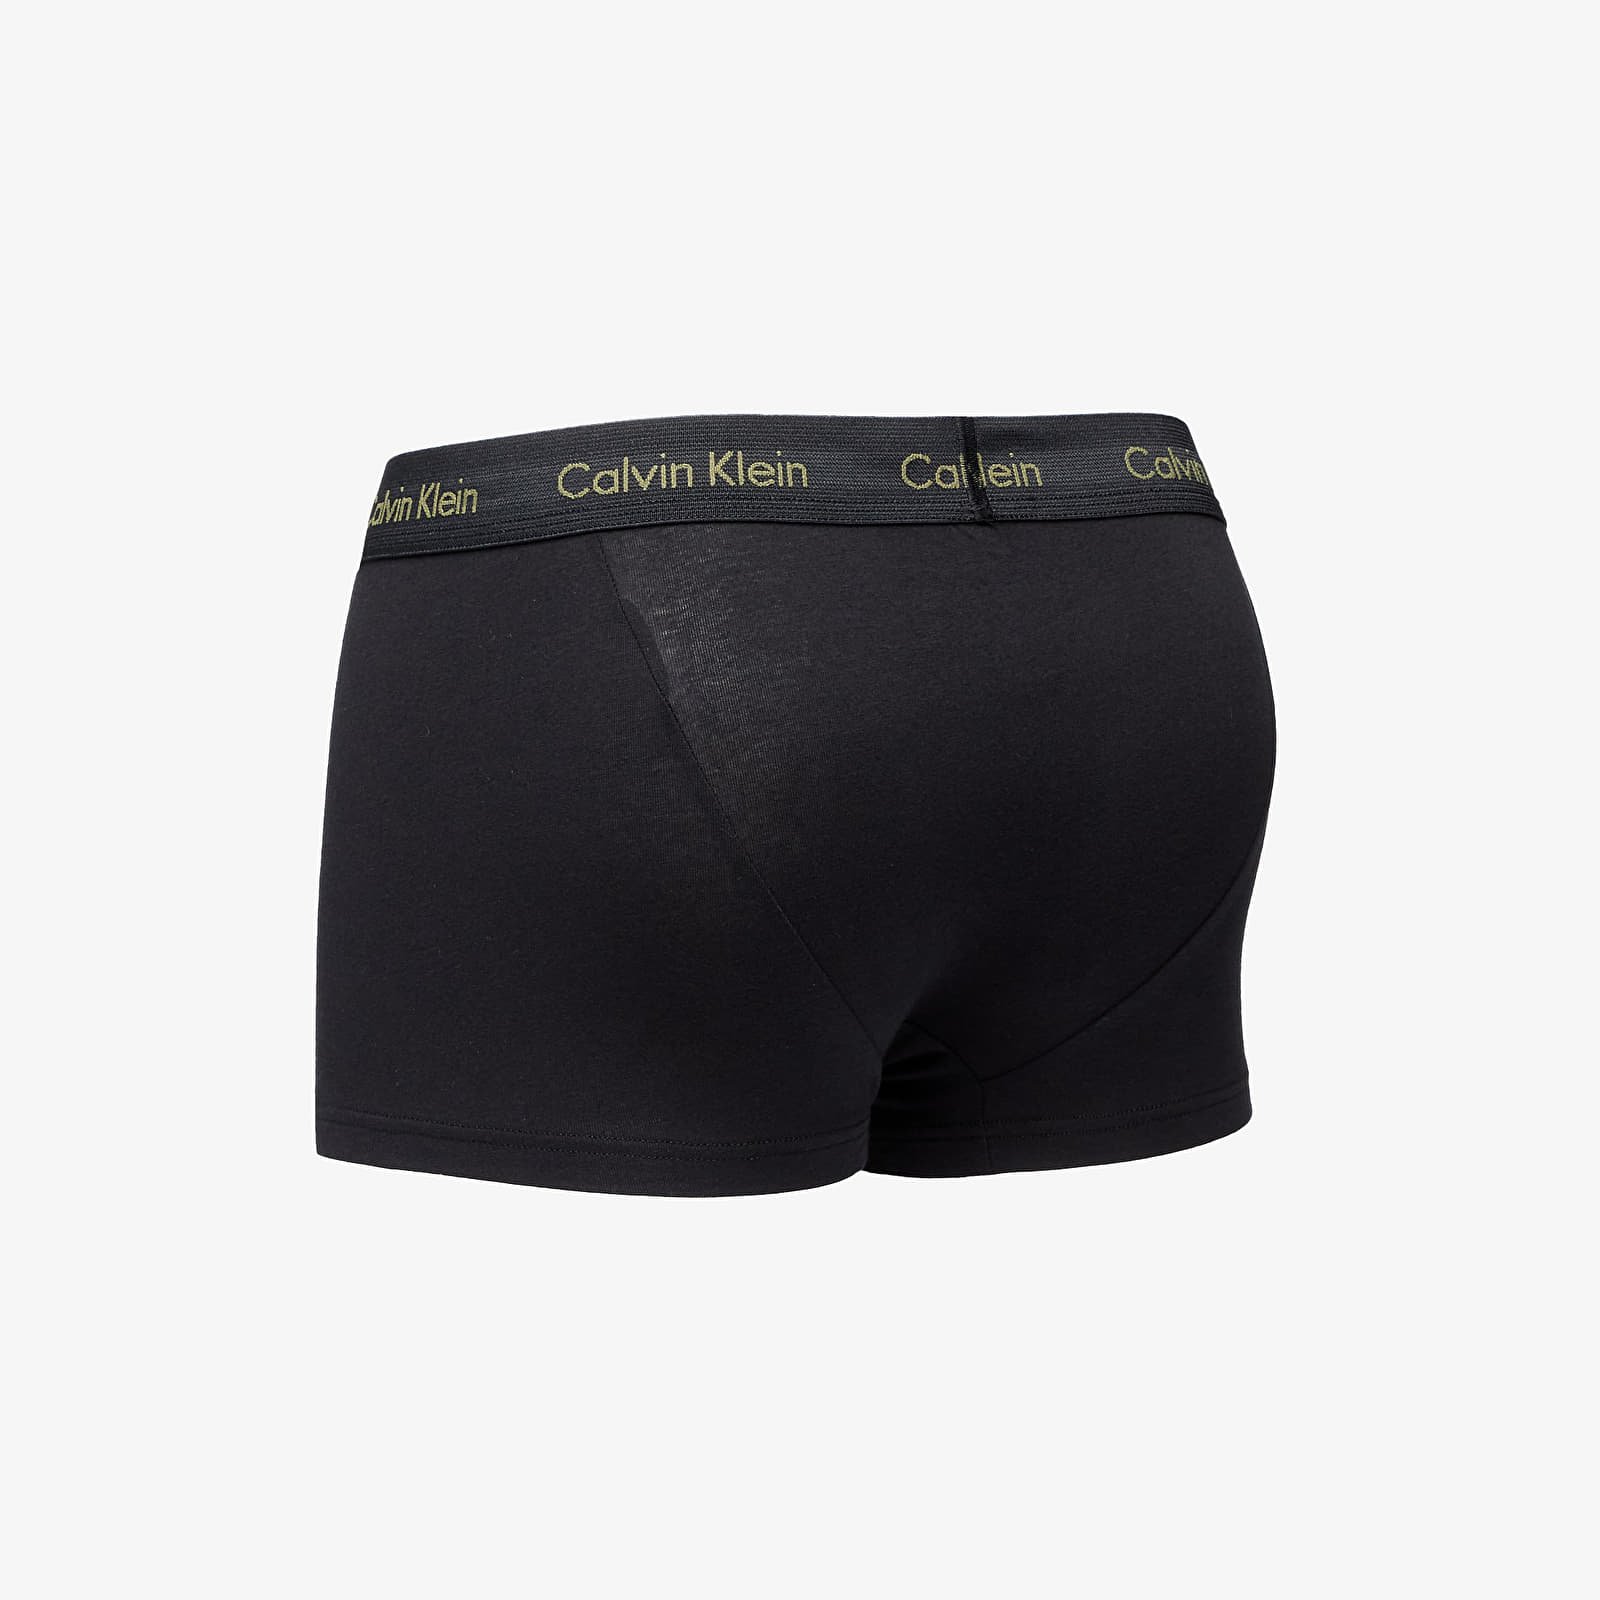 Cotton Stretch Low Rise Trunk 3-Pack Boxers